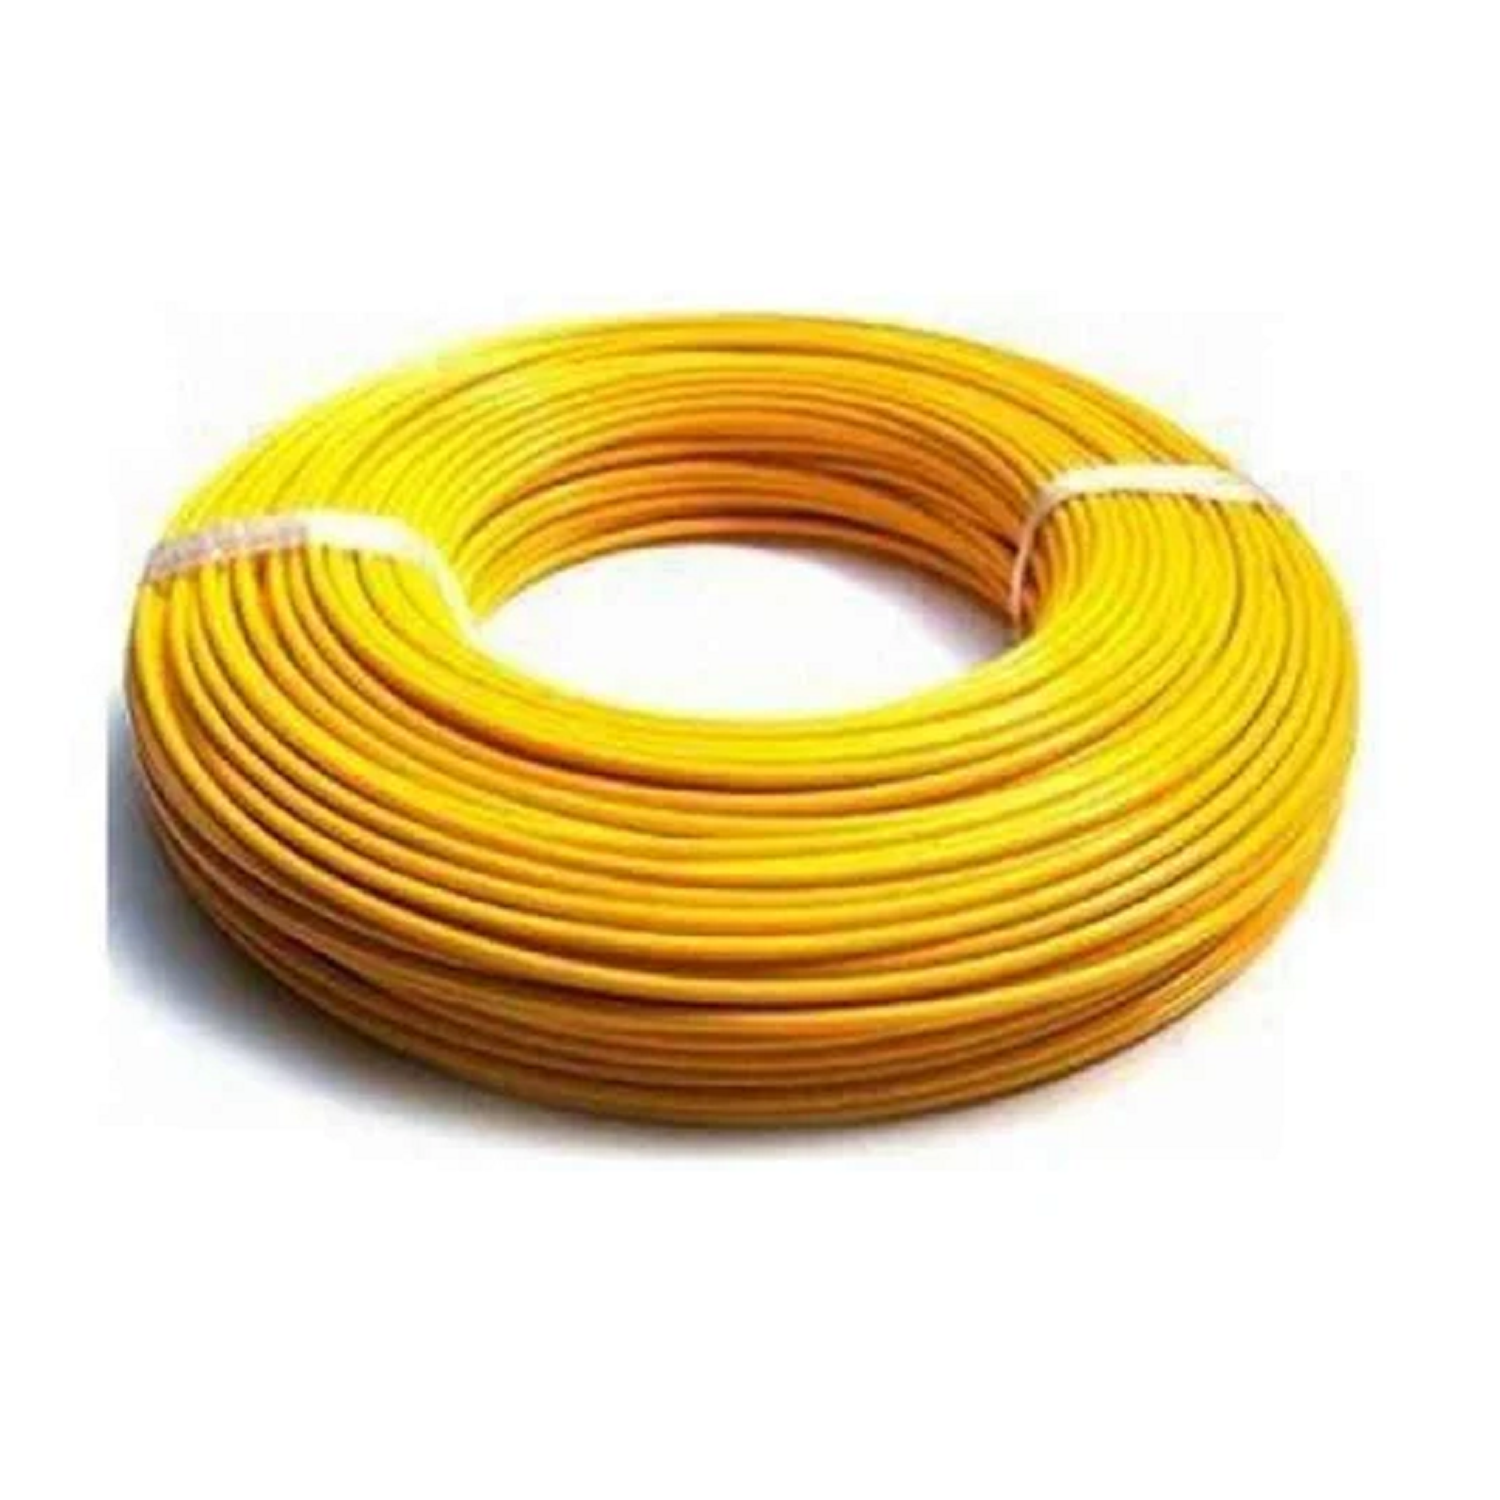 1.0 Sqmm KEI FR Single Core Copper Wire (180 Mtr) With PVC Insulated for Domestic 38 Industrial Uses